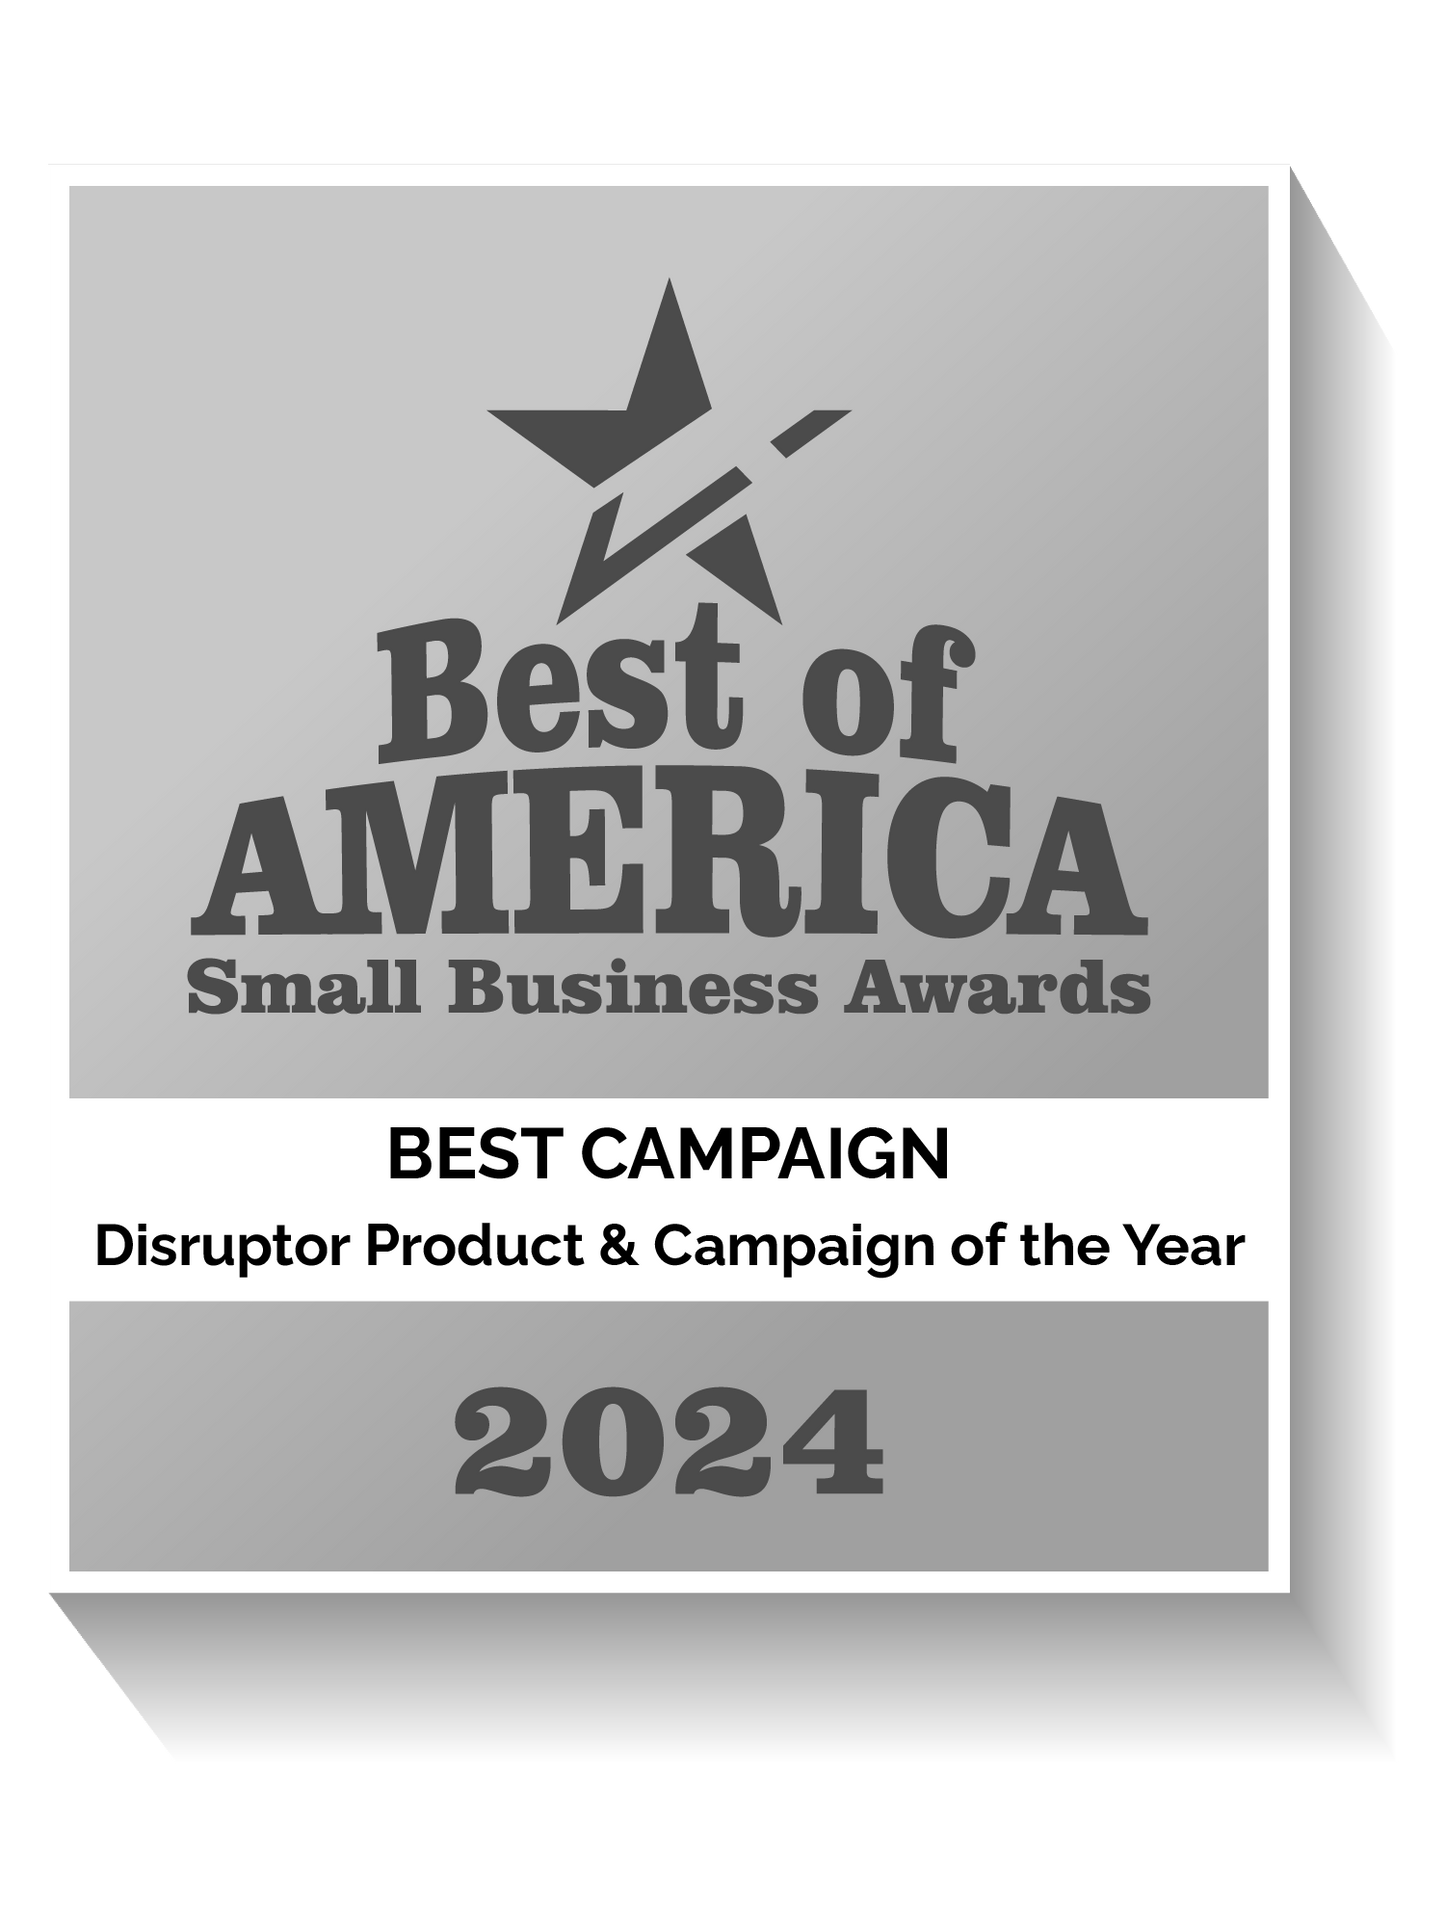 Disruptor Product & Campaign of the Year